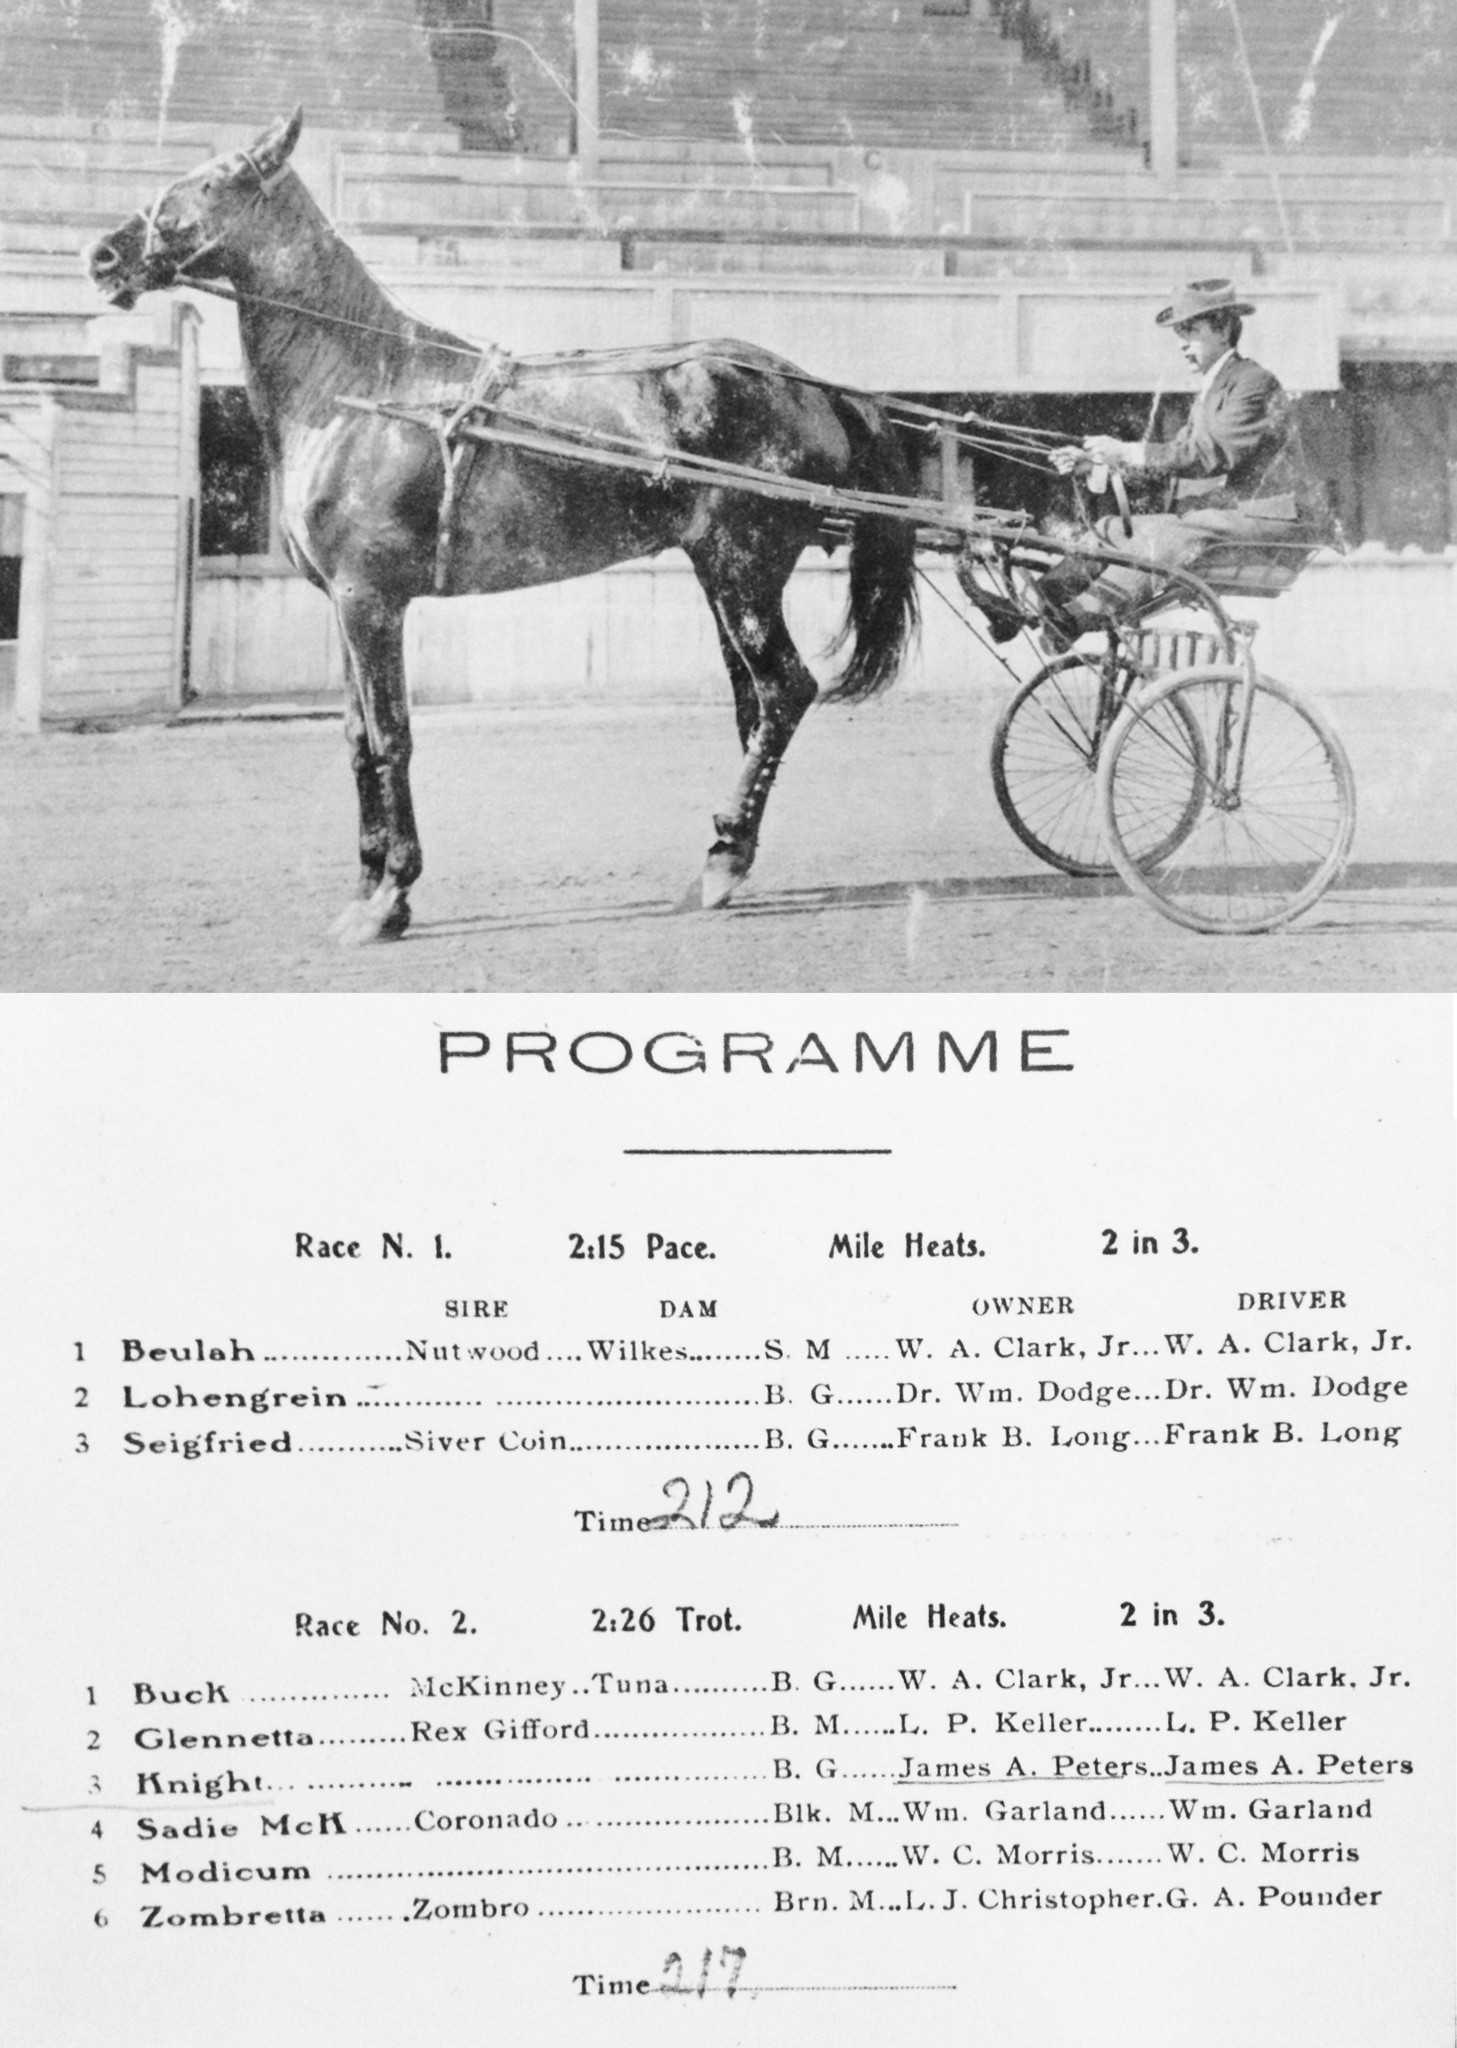 James Peters and Knight at Hollywood Exposition Park and program from a 1908 race where their time was 2 minutes 17 seconds. (Photo from family archives)